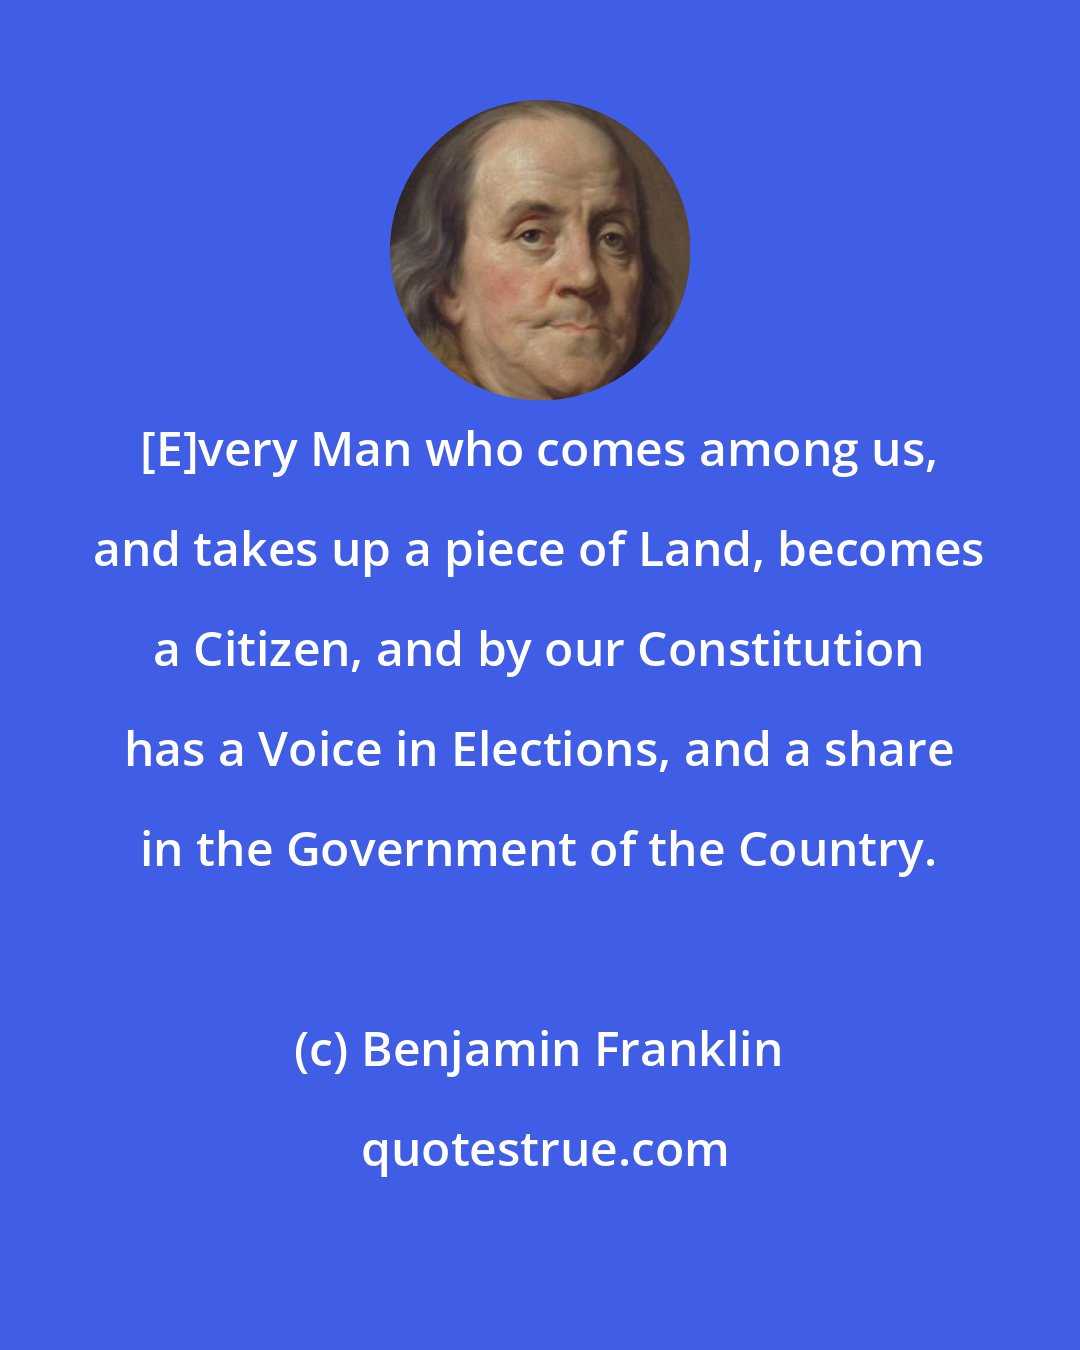 Benjamin Franklin: [E]very Man who comes among us, and takes up a piece of Land, becomes a Citizen, and by our Constitution has a Voice in Elections, and a share in the Government of the Country.